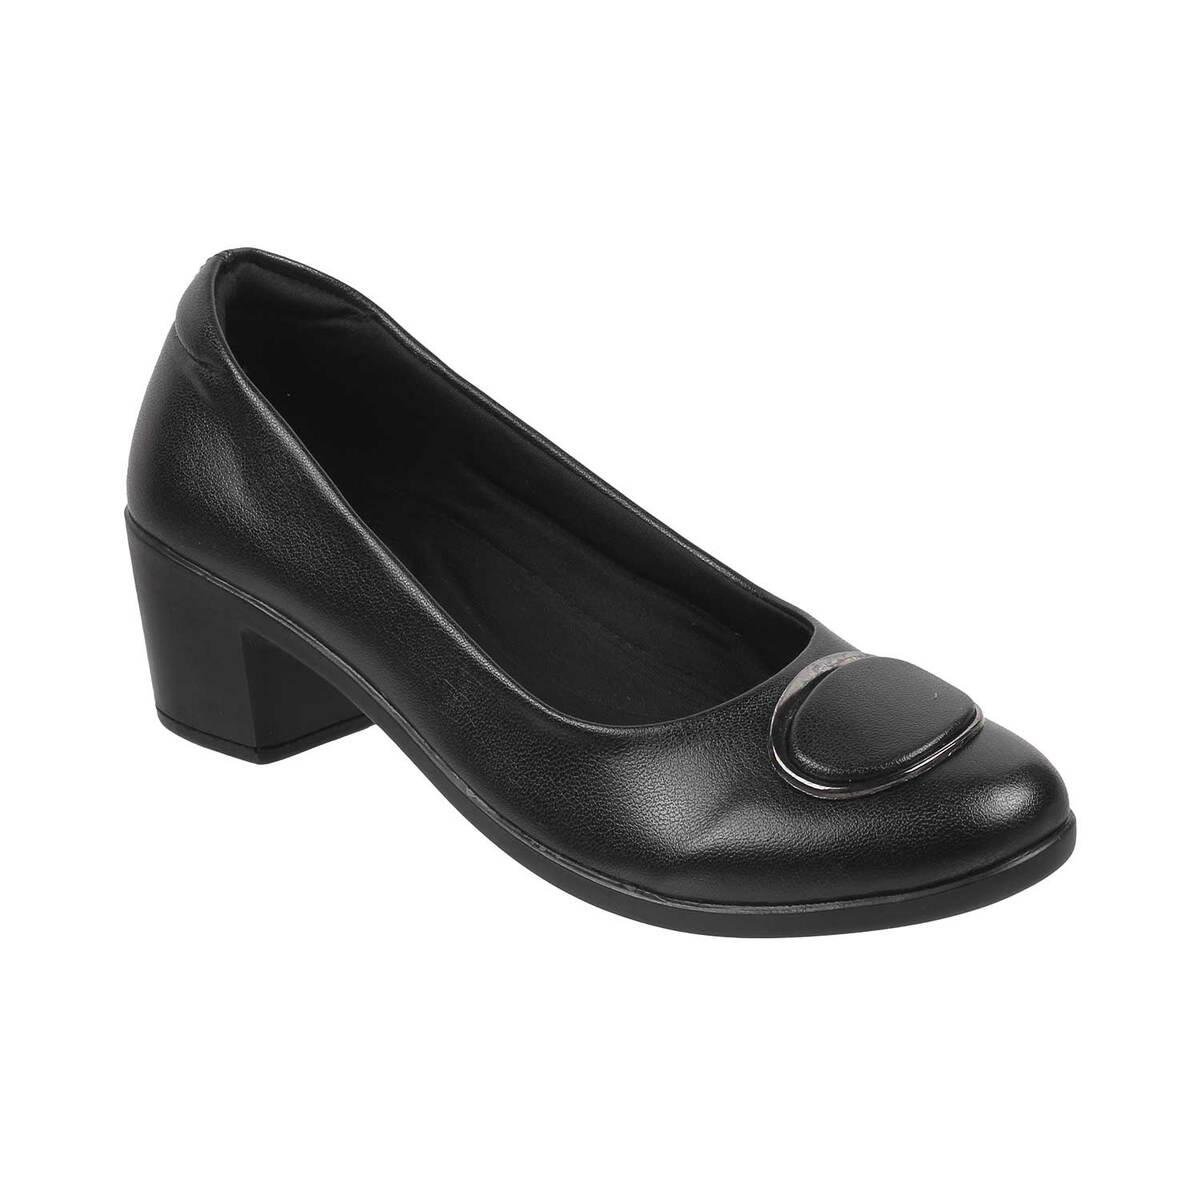 Women's Pumps  FREE Shipping at